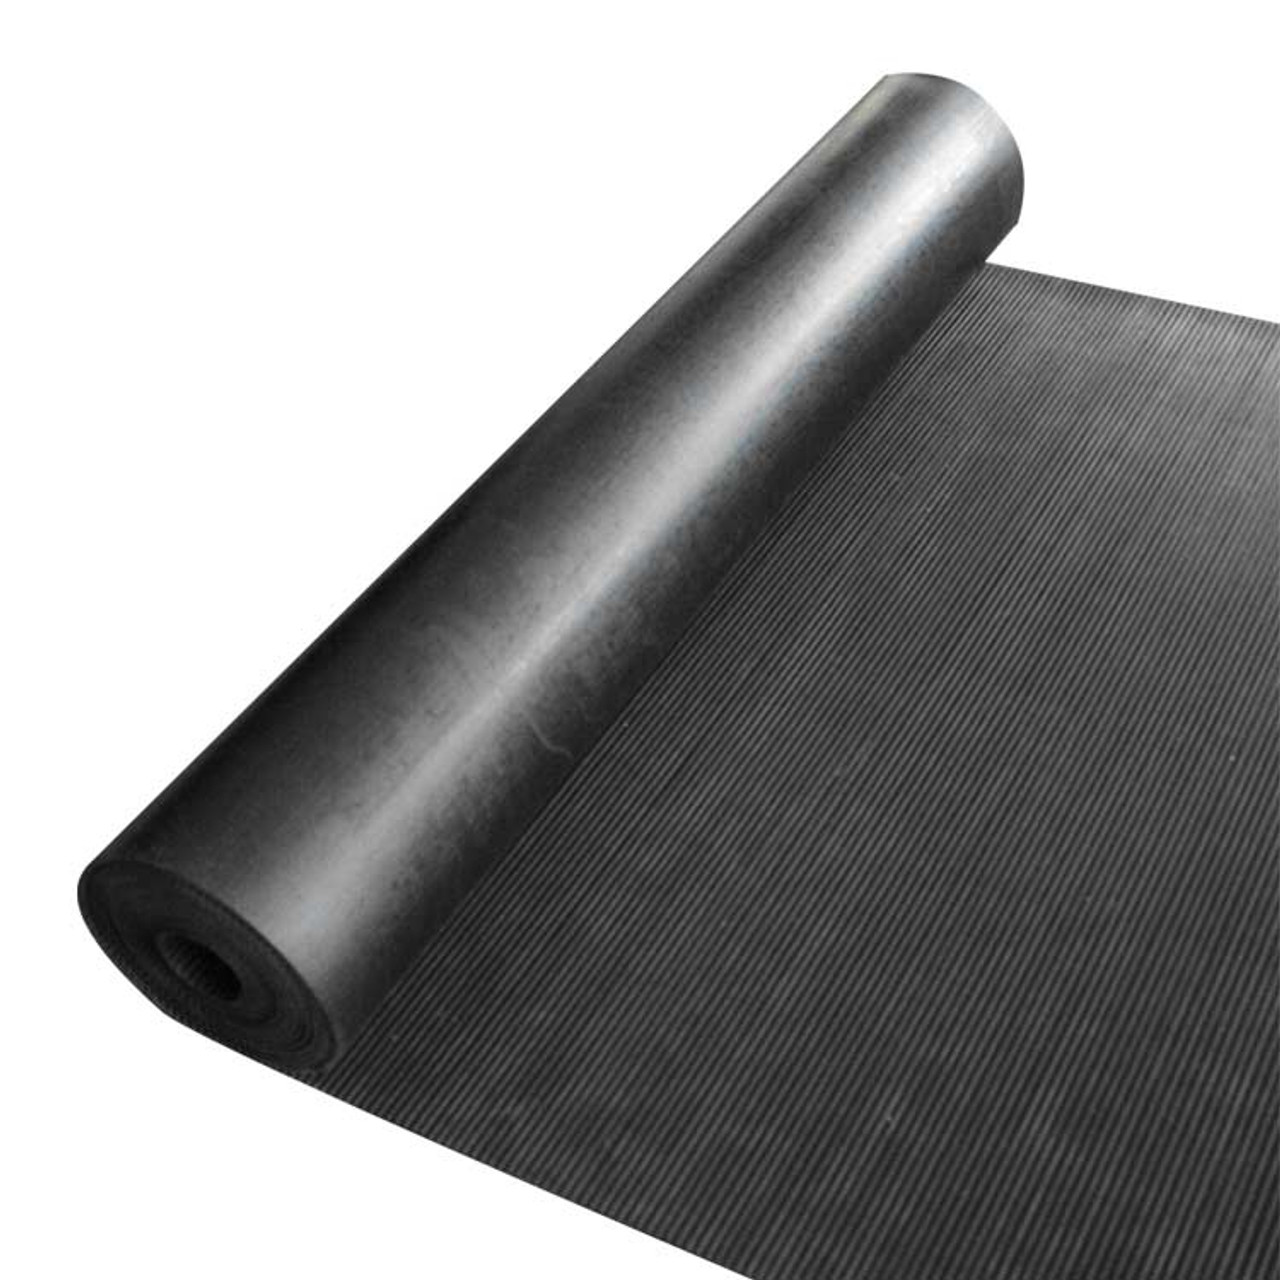 Rubber-Cal Fine-rib Corrugated Rubber Floor Mats - 1/8 in x 4 ft x 6 ft Black Rubber Runners